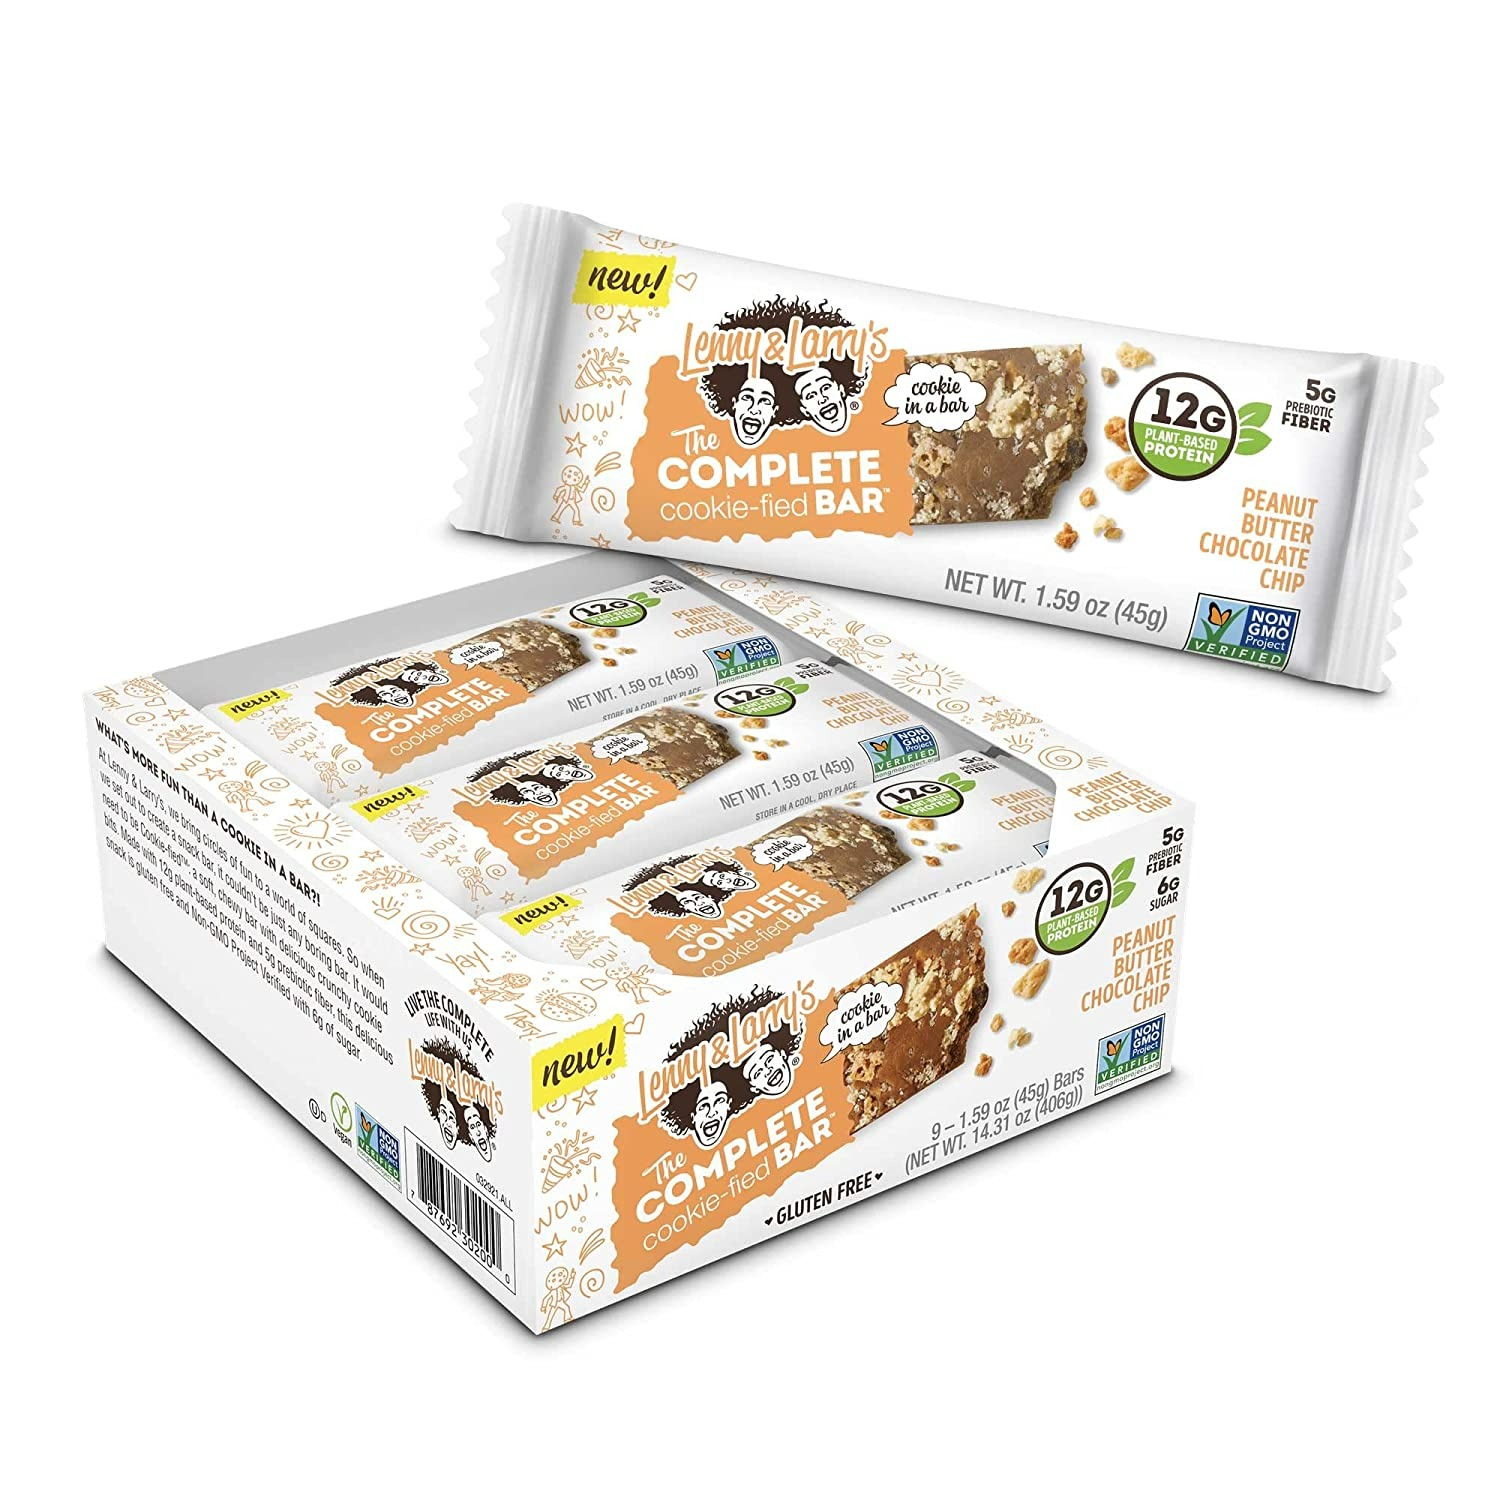 Lenny & Larry's The Complete Cookie-fied Bar - Peanut Butter Chocolate Chip Plant-Based Protein Bar - 9 Adet